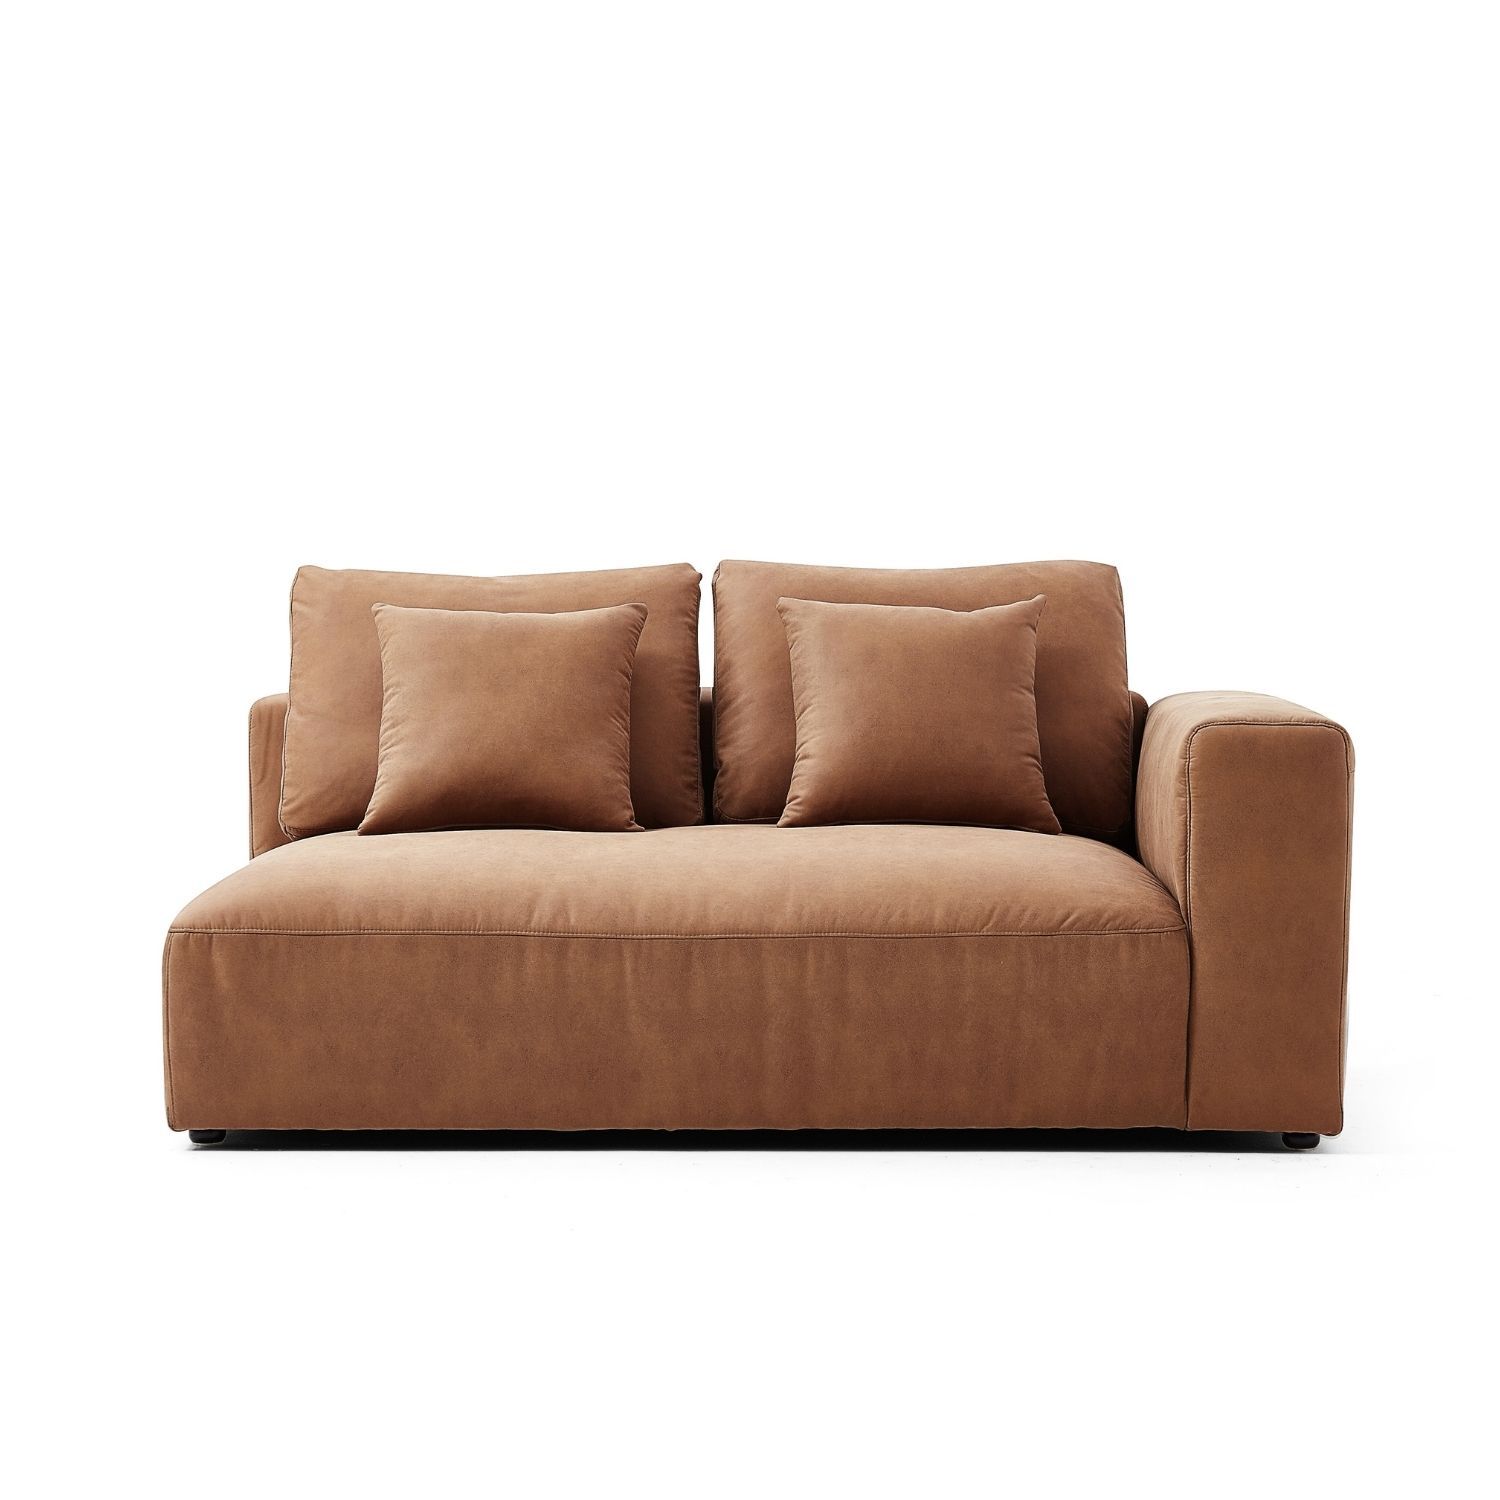 The 5th Side Sofa Sofa Foundry Camel Facing Right 67 Inch